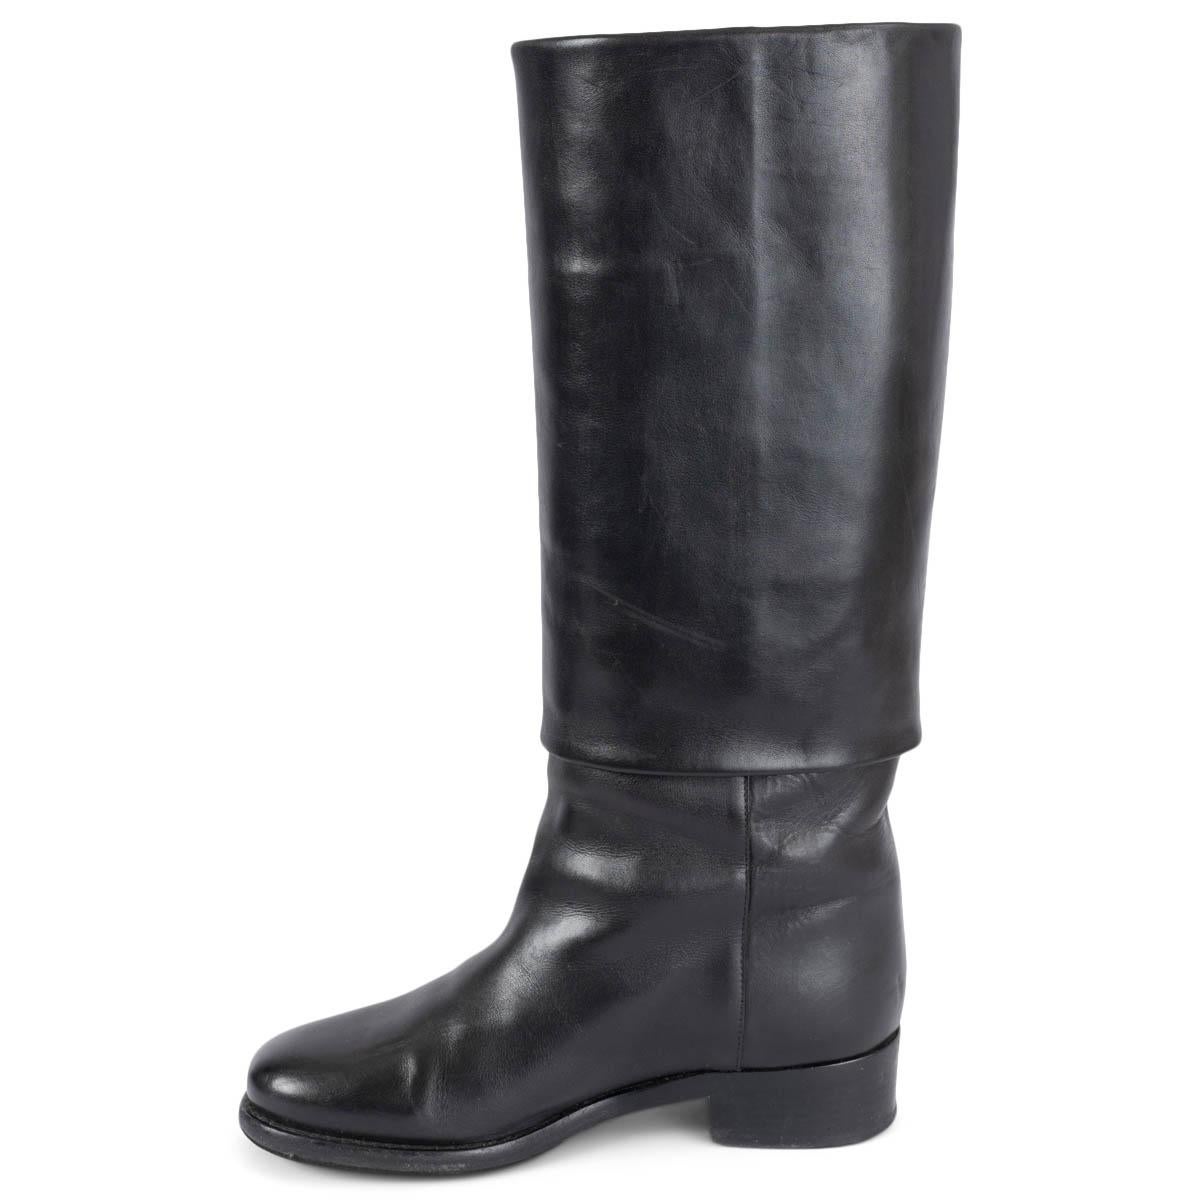 Women's CHANEL black leather 2012 12A BOMBAY RIDING Boots Shoes 37 fit 36